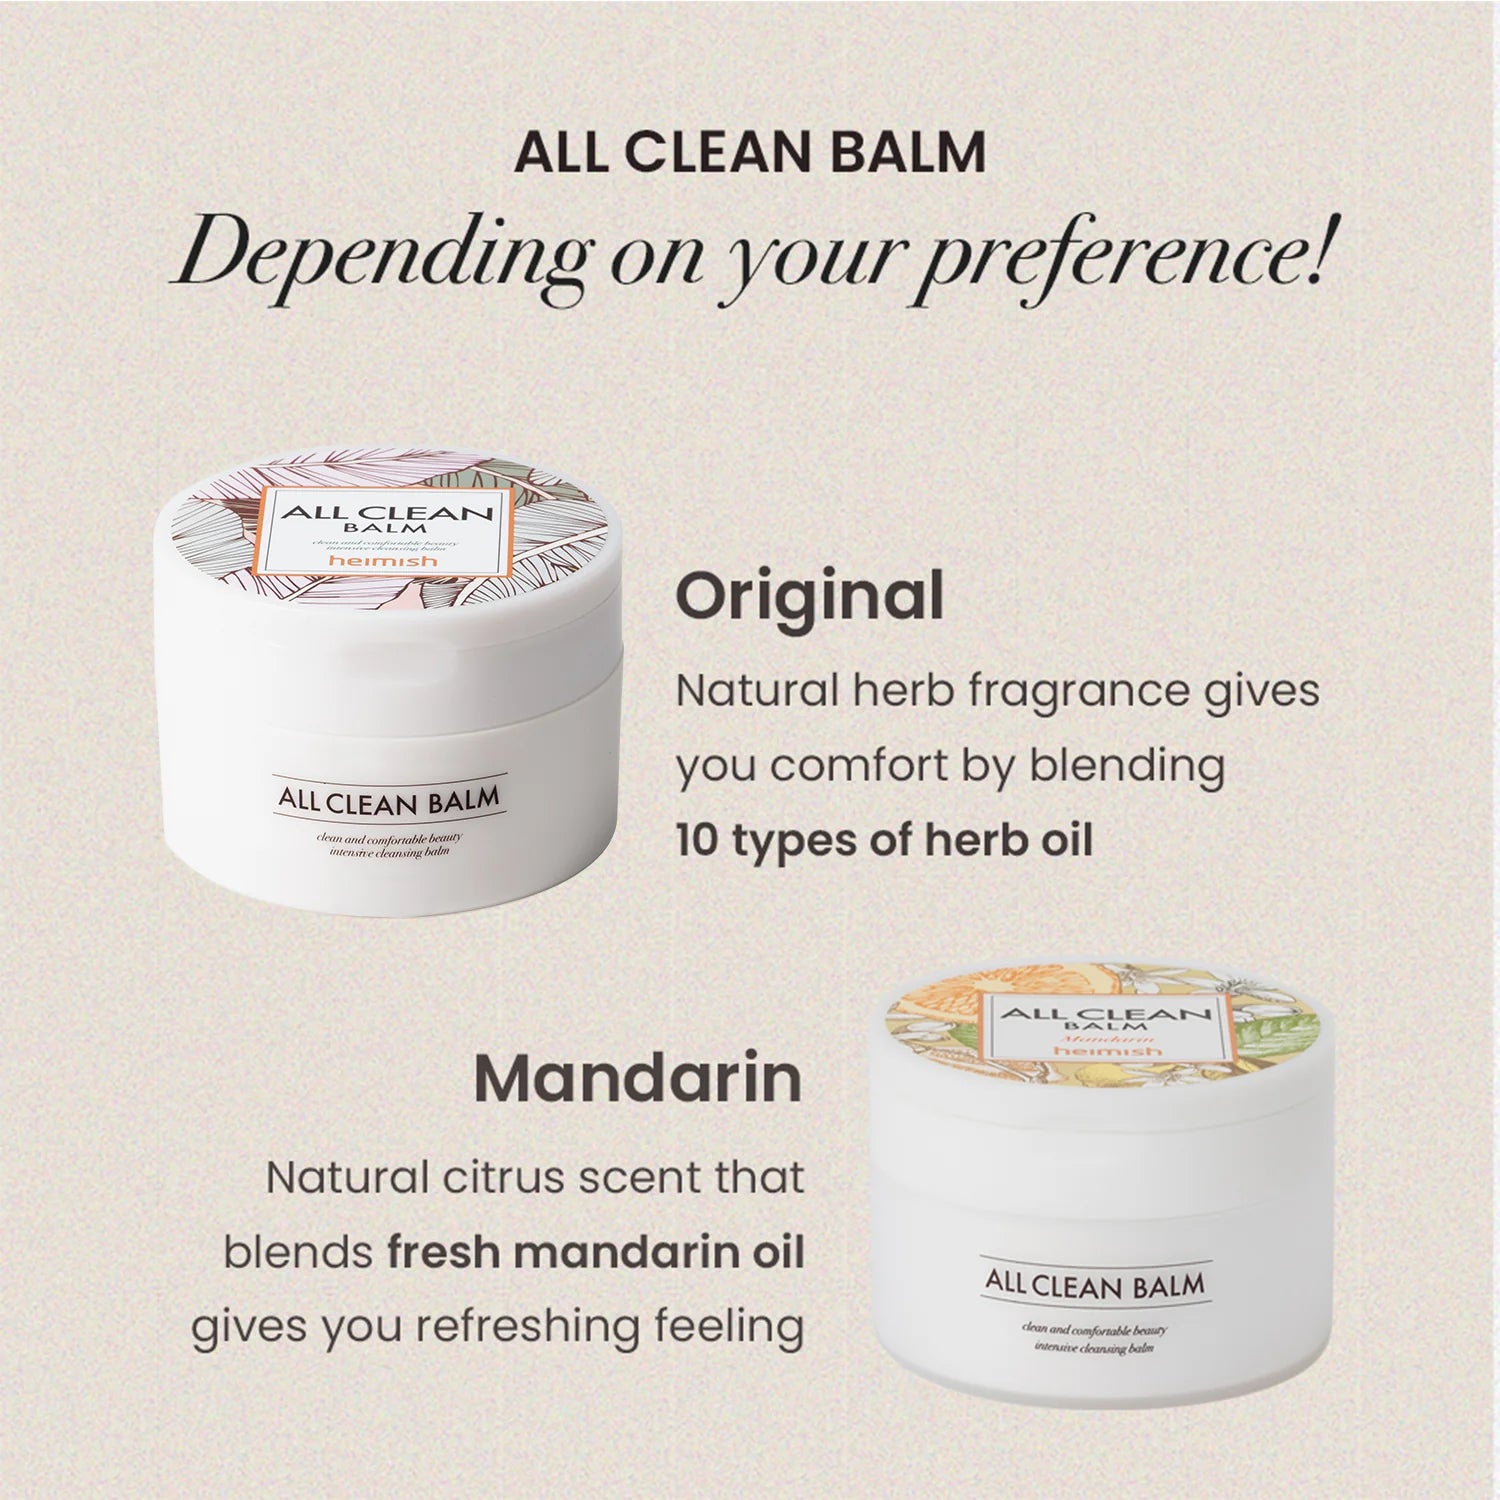 All Clean Balm versus oil cleansers for dry skin